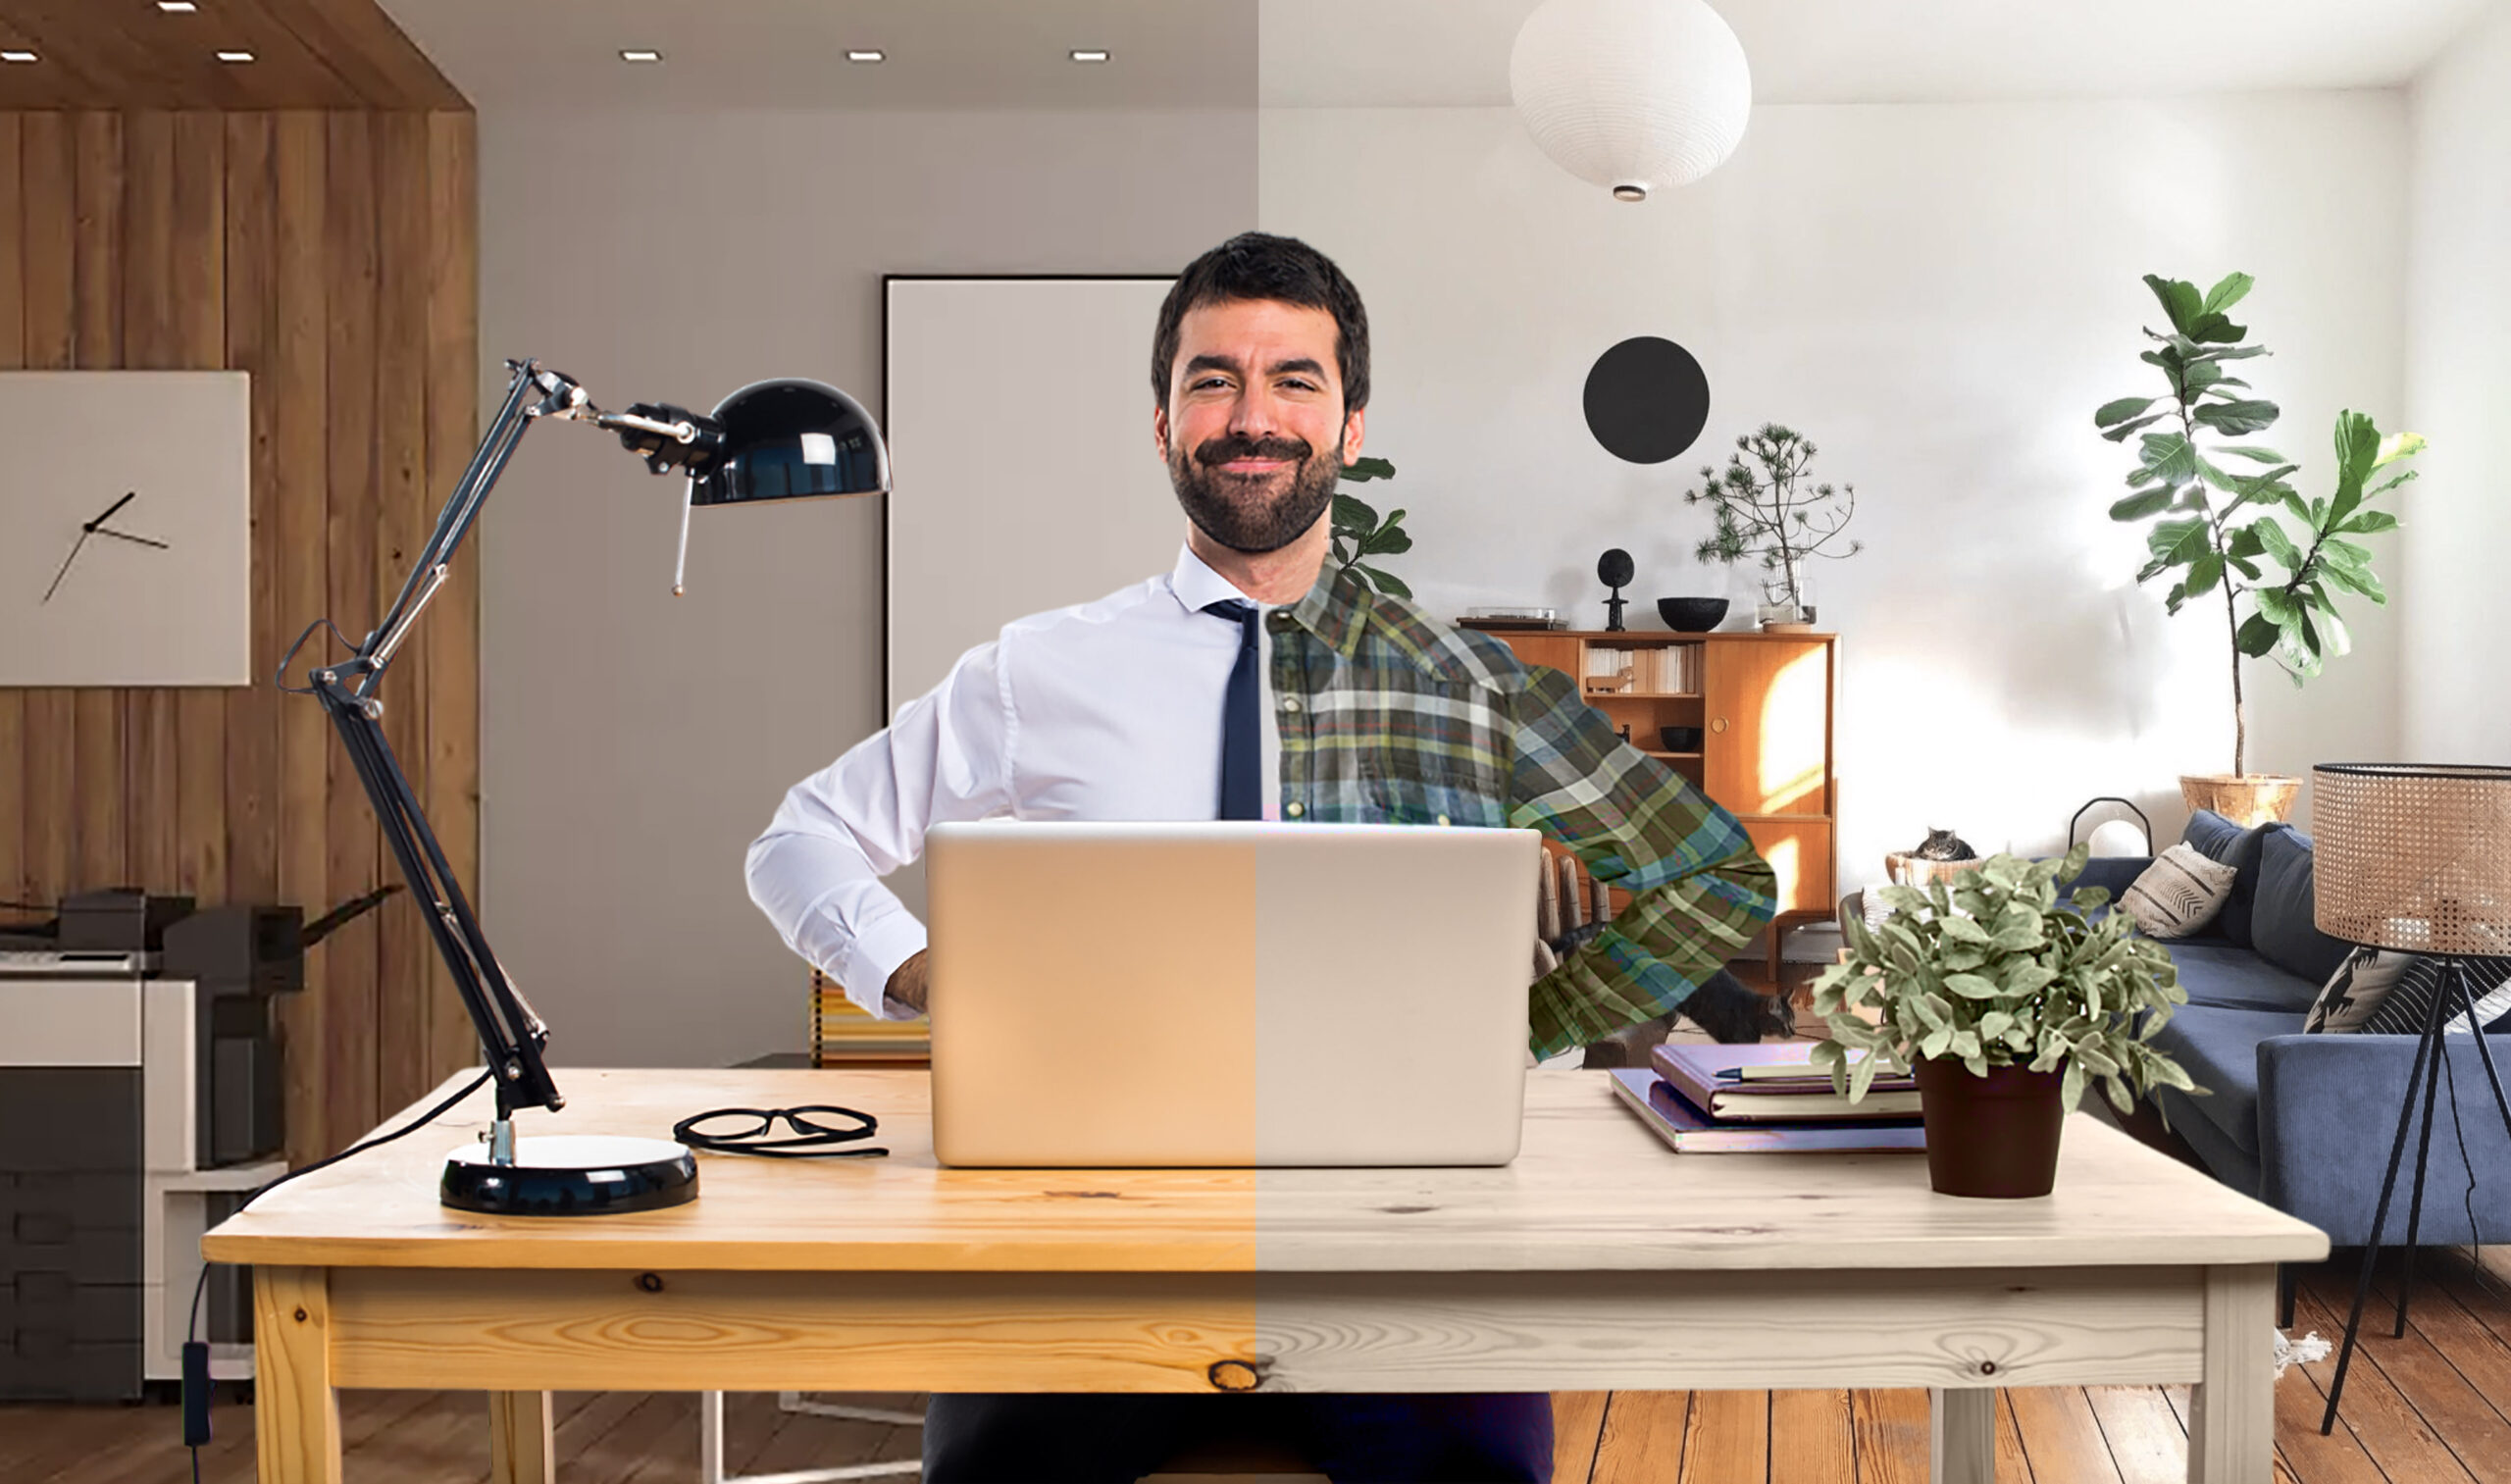 Benefits of Remote Work - A business owner